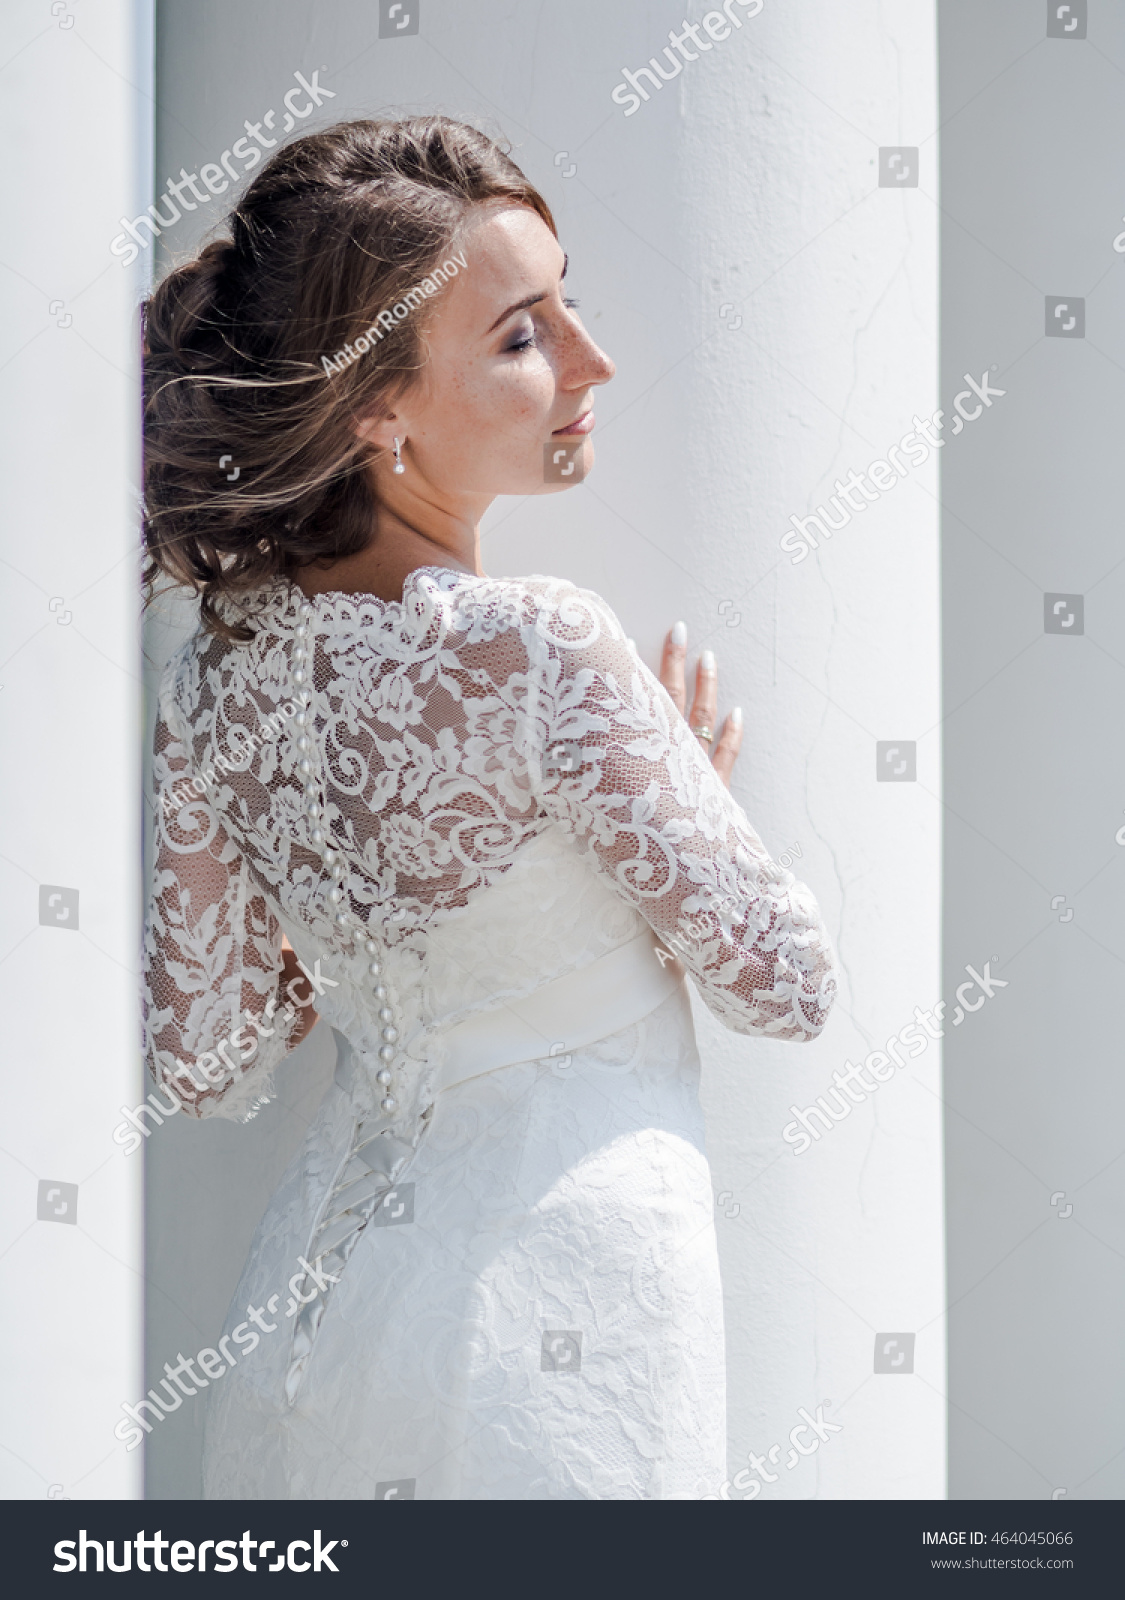 https://image.shutterstock.com/z/stock-photo-a-beautiful-russian-bride-in-a-white-dress-on-a-white-background-464045066.jpg